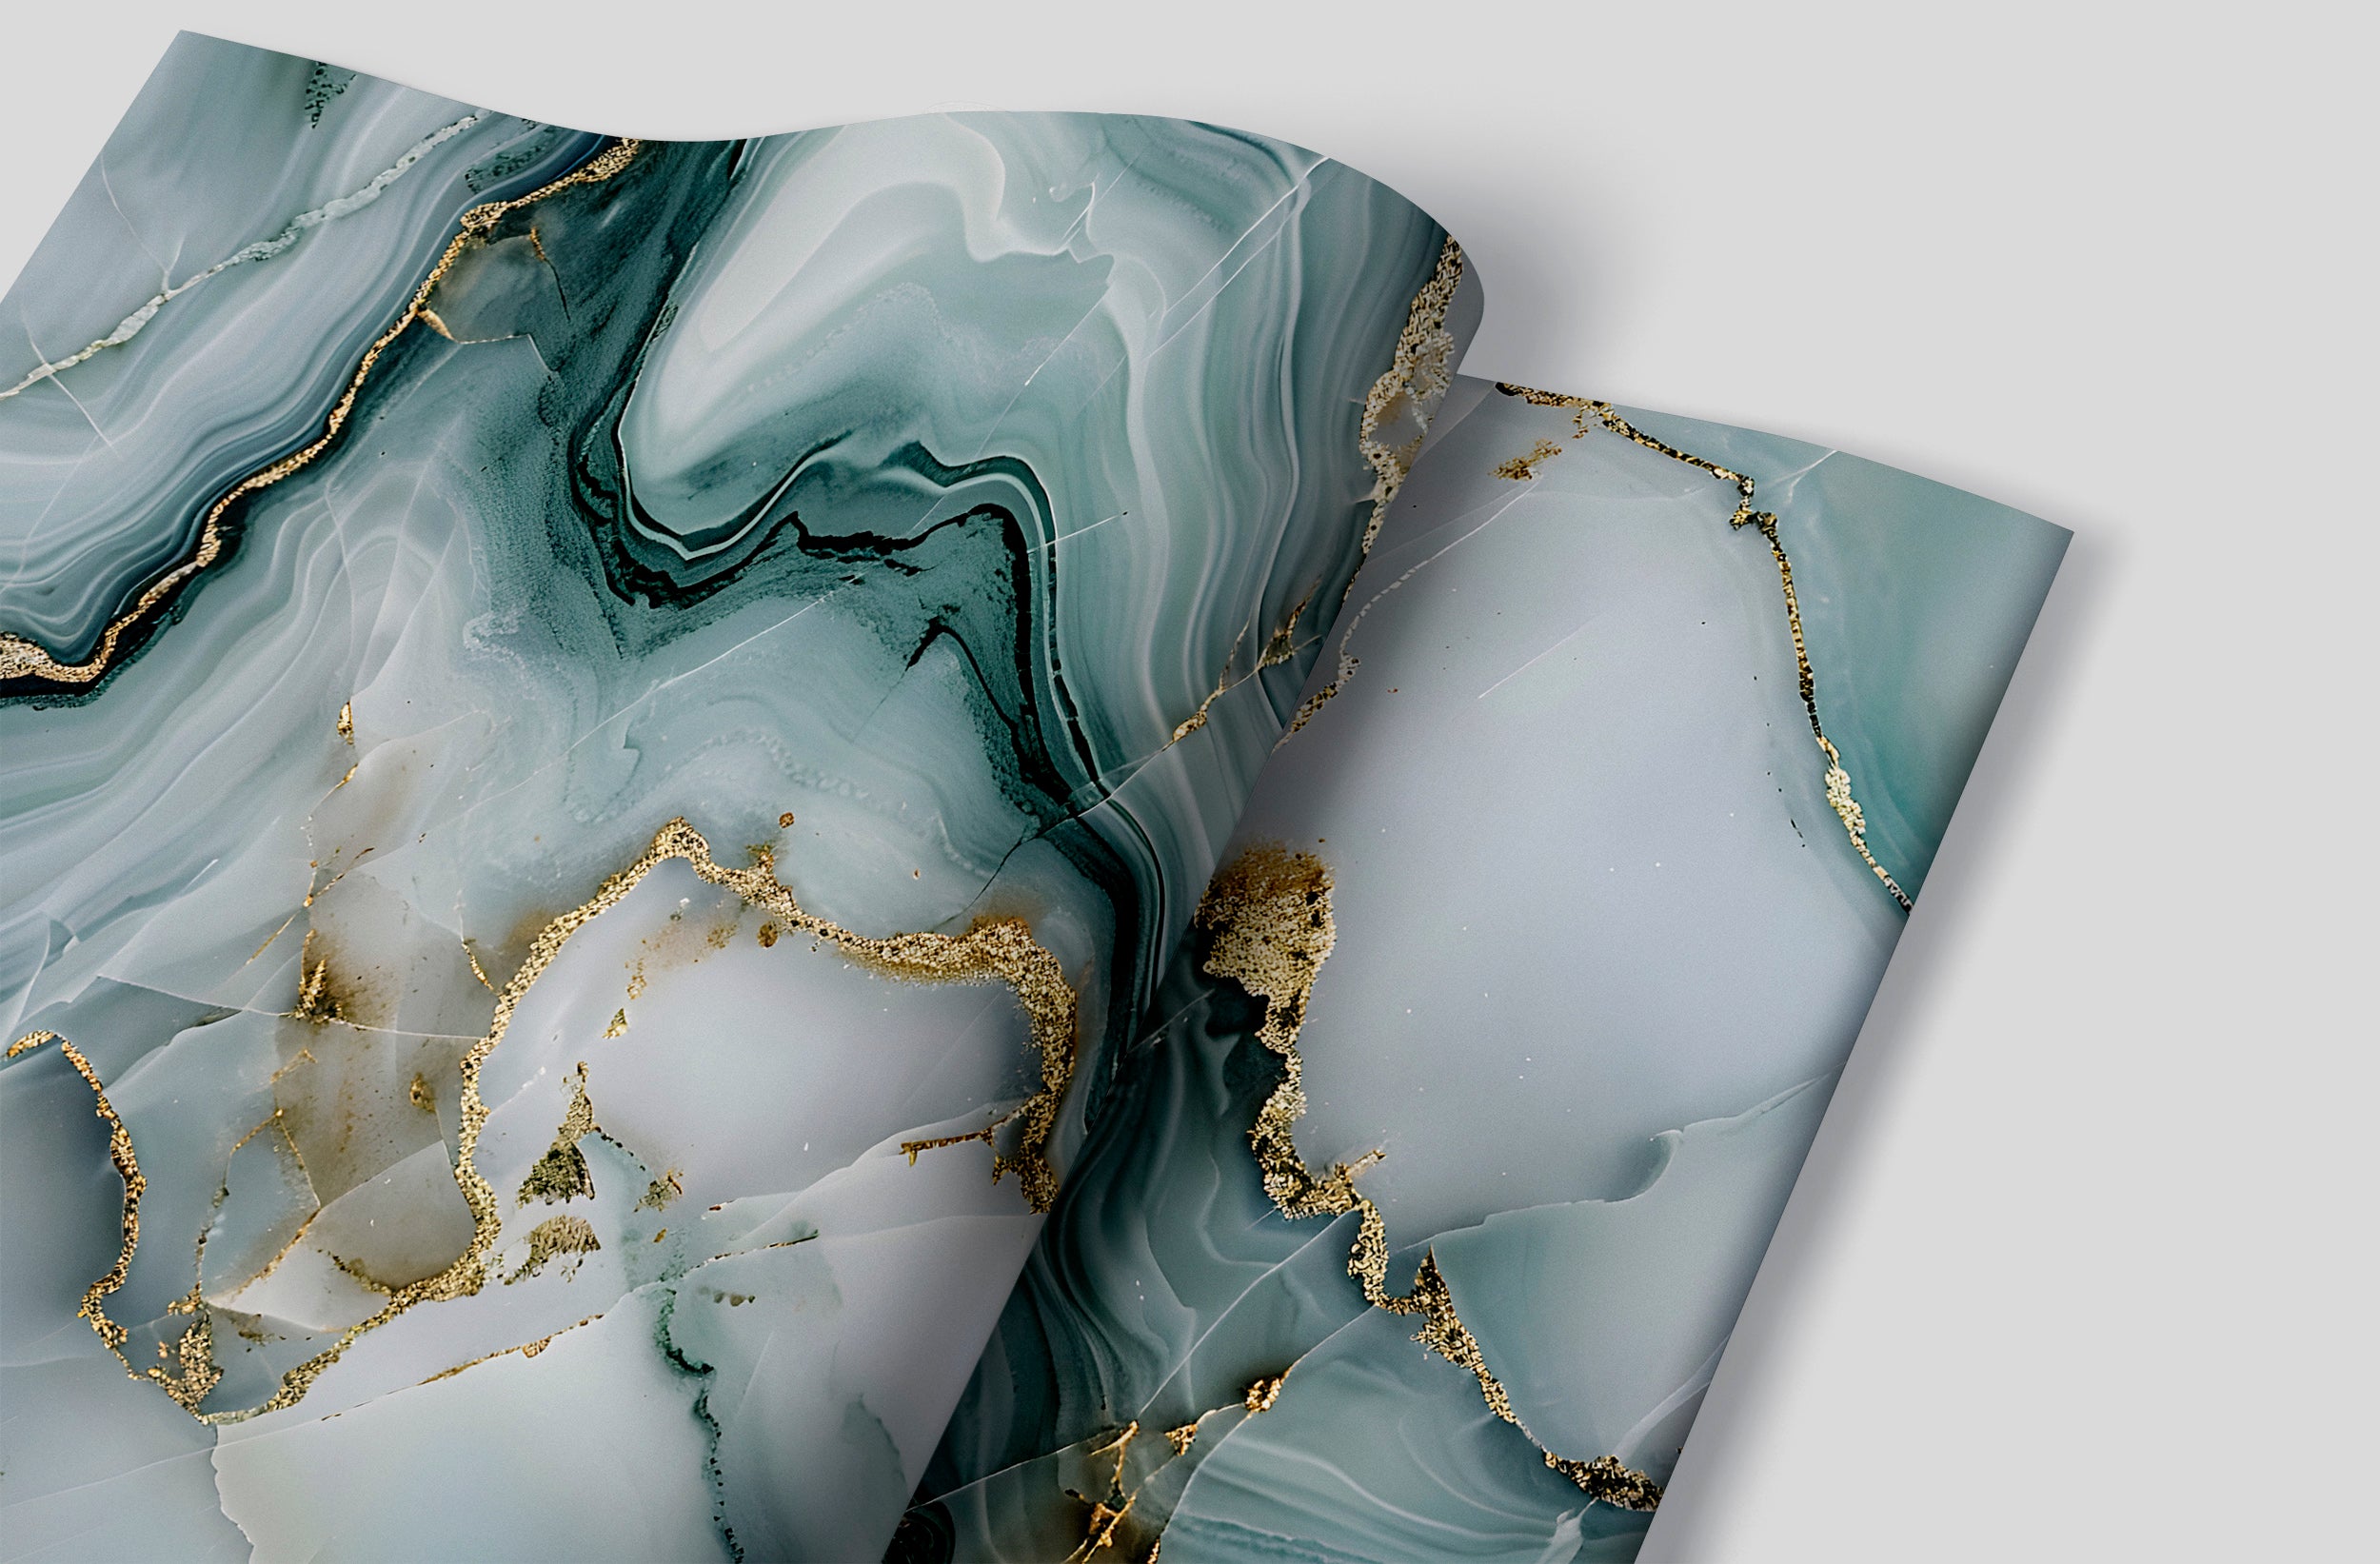 Mint Grey and Gold Alcohol Ink Mural, Peel and Stick Marble Texture Wallpaper, Abstract Green and Grey Stone Wall Decor, Removable Unique Art